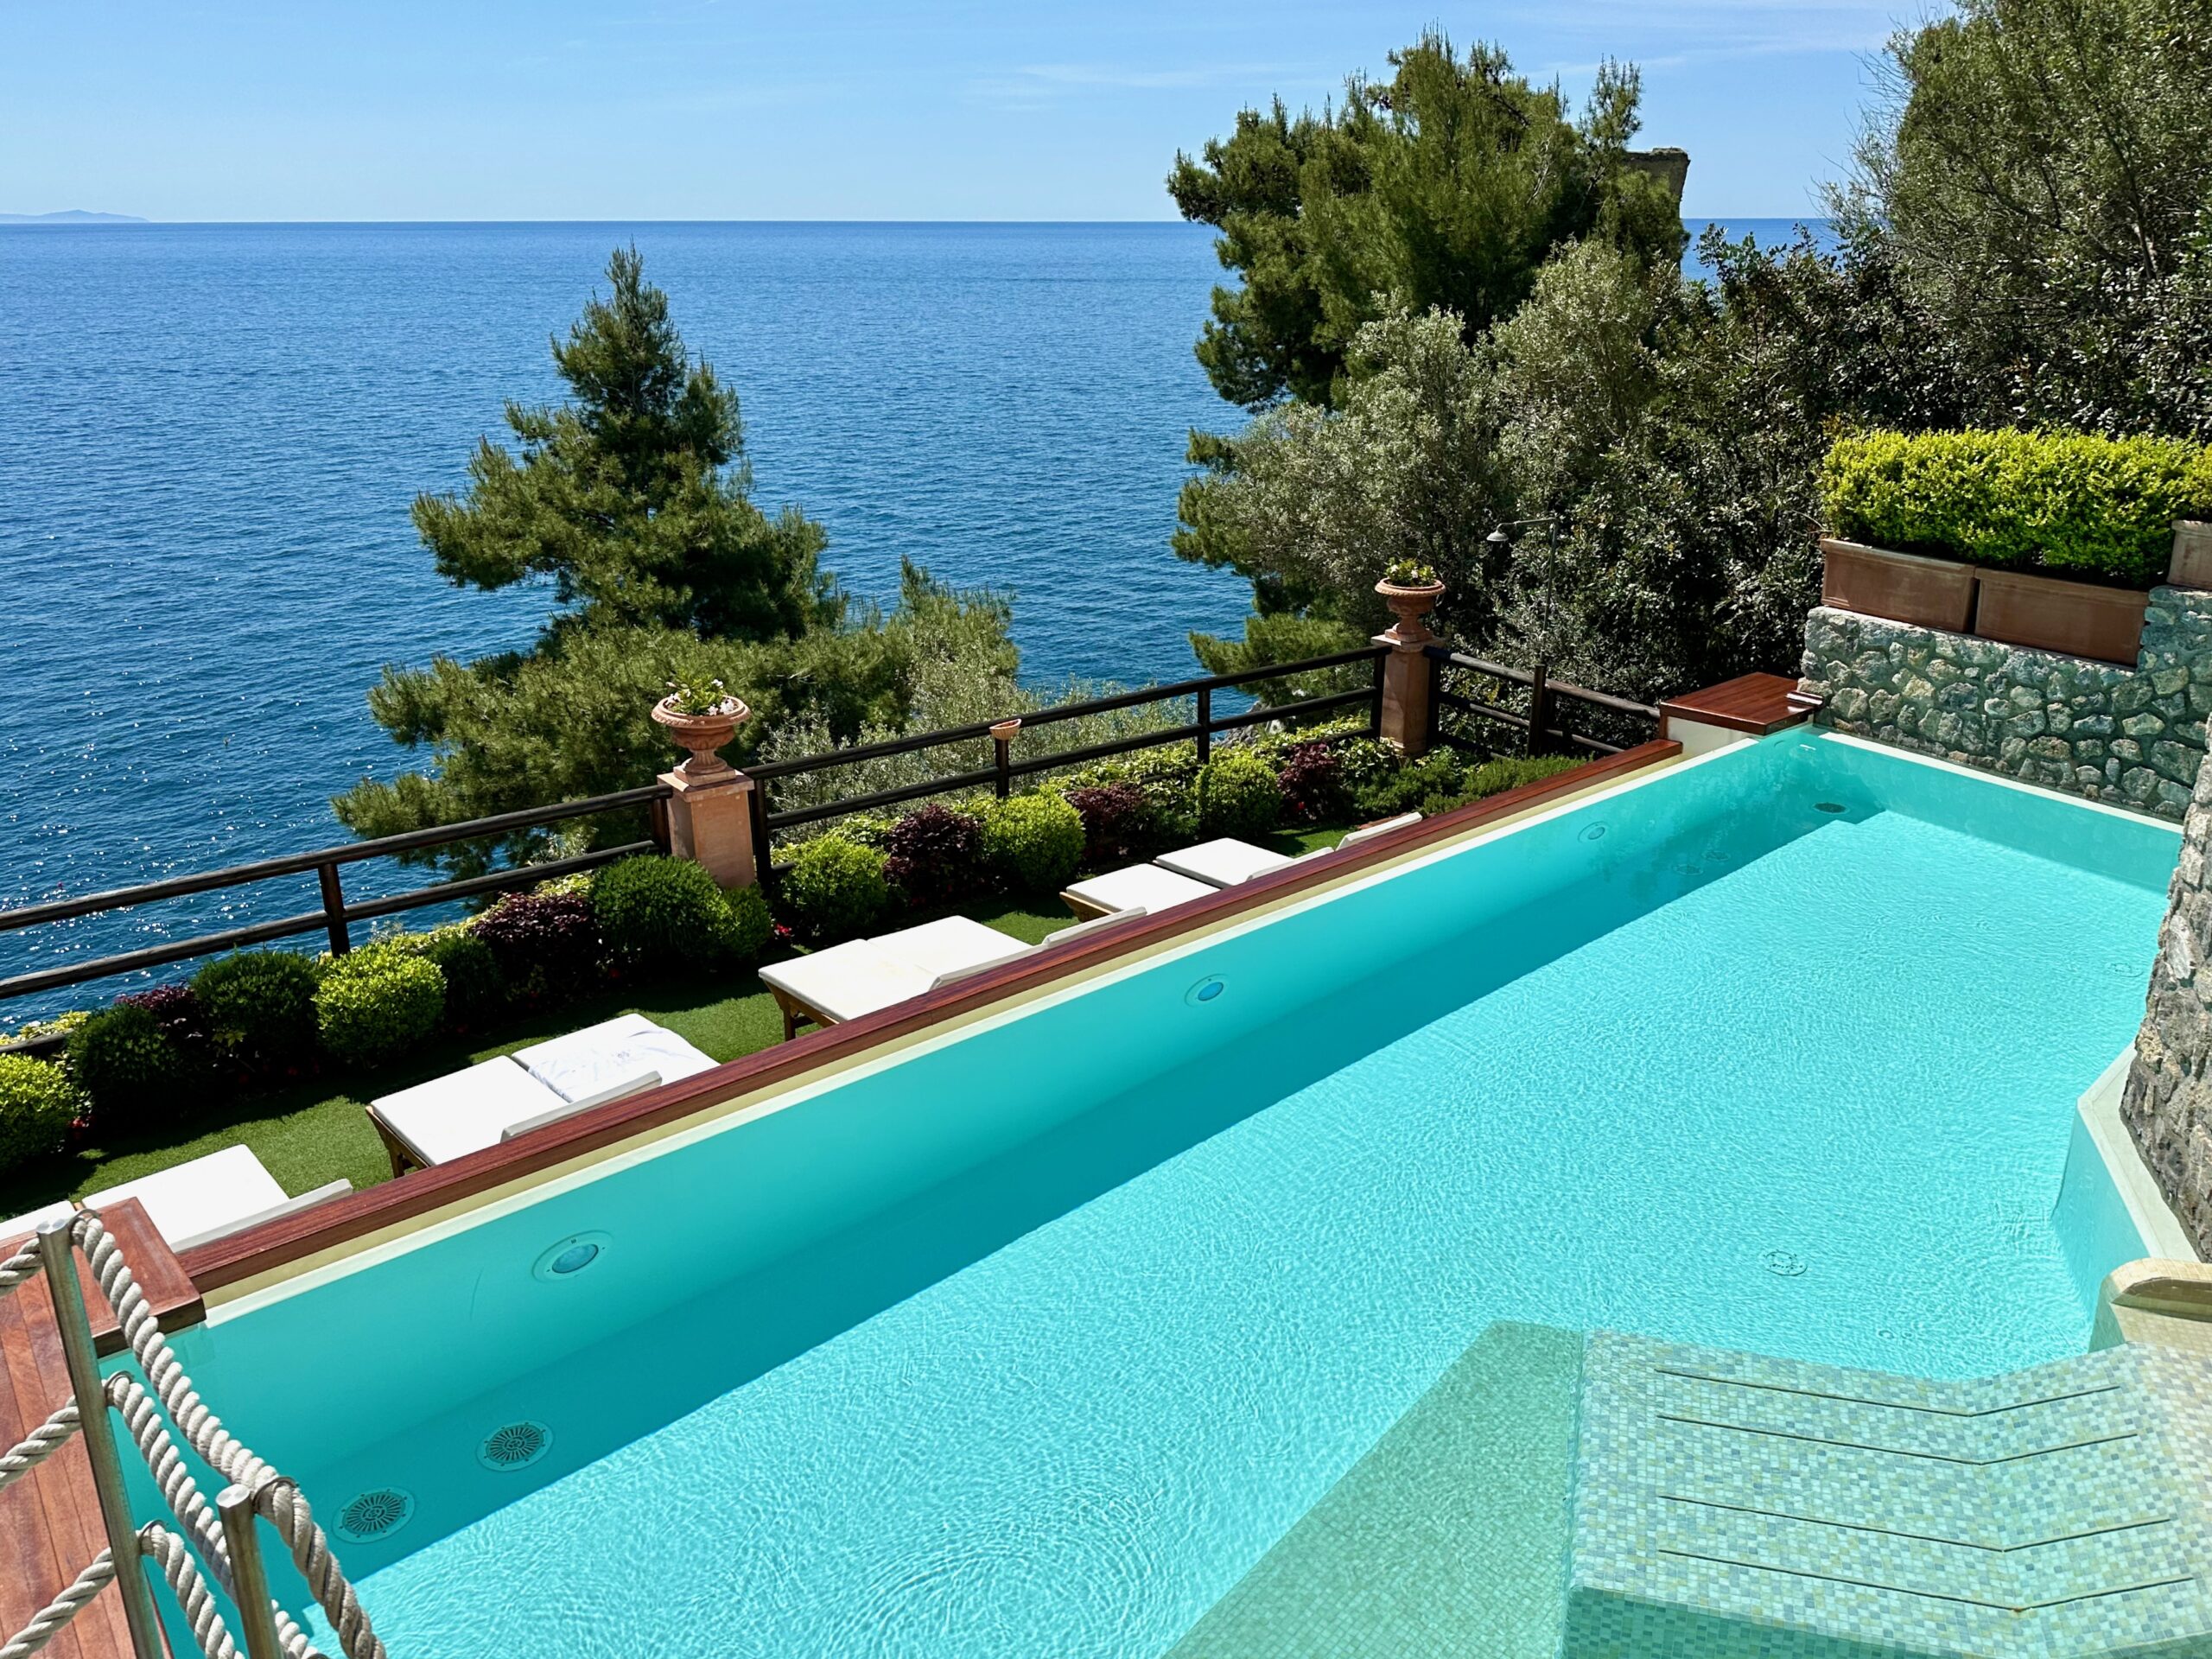 Infinity pool with a sunken lounge chair inside and a row of sunbeds facing the sea at Hotel Onda Verde and Villa Corallium in Praiano on the Amalfi Coast